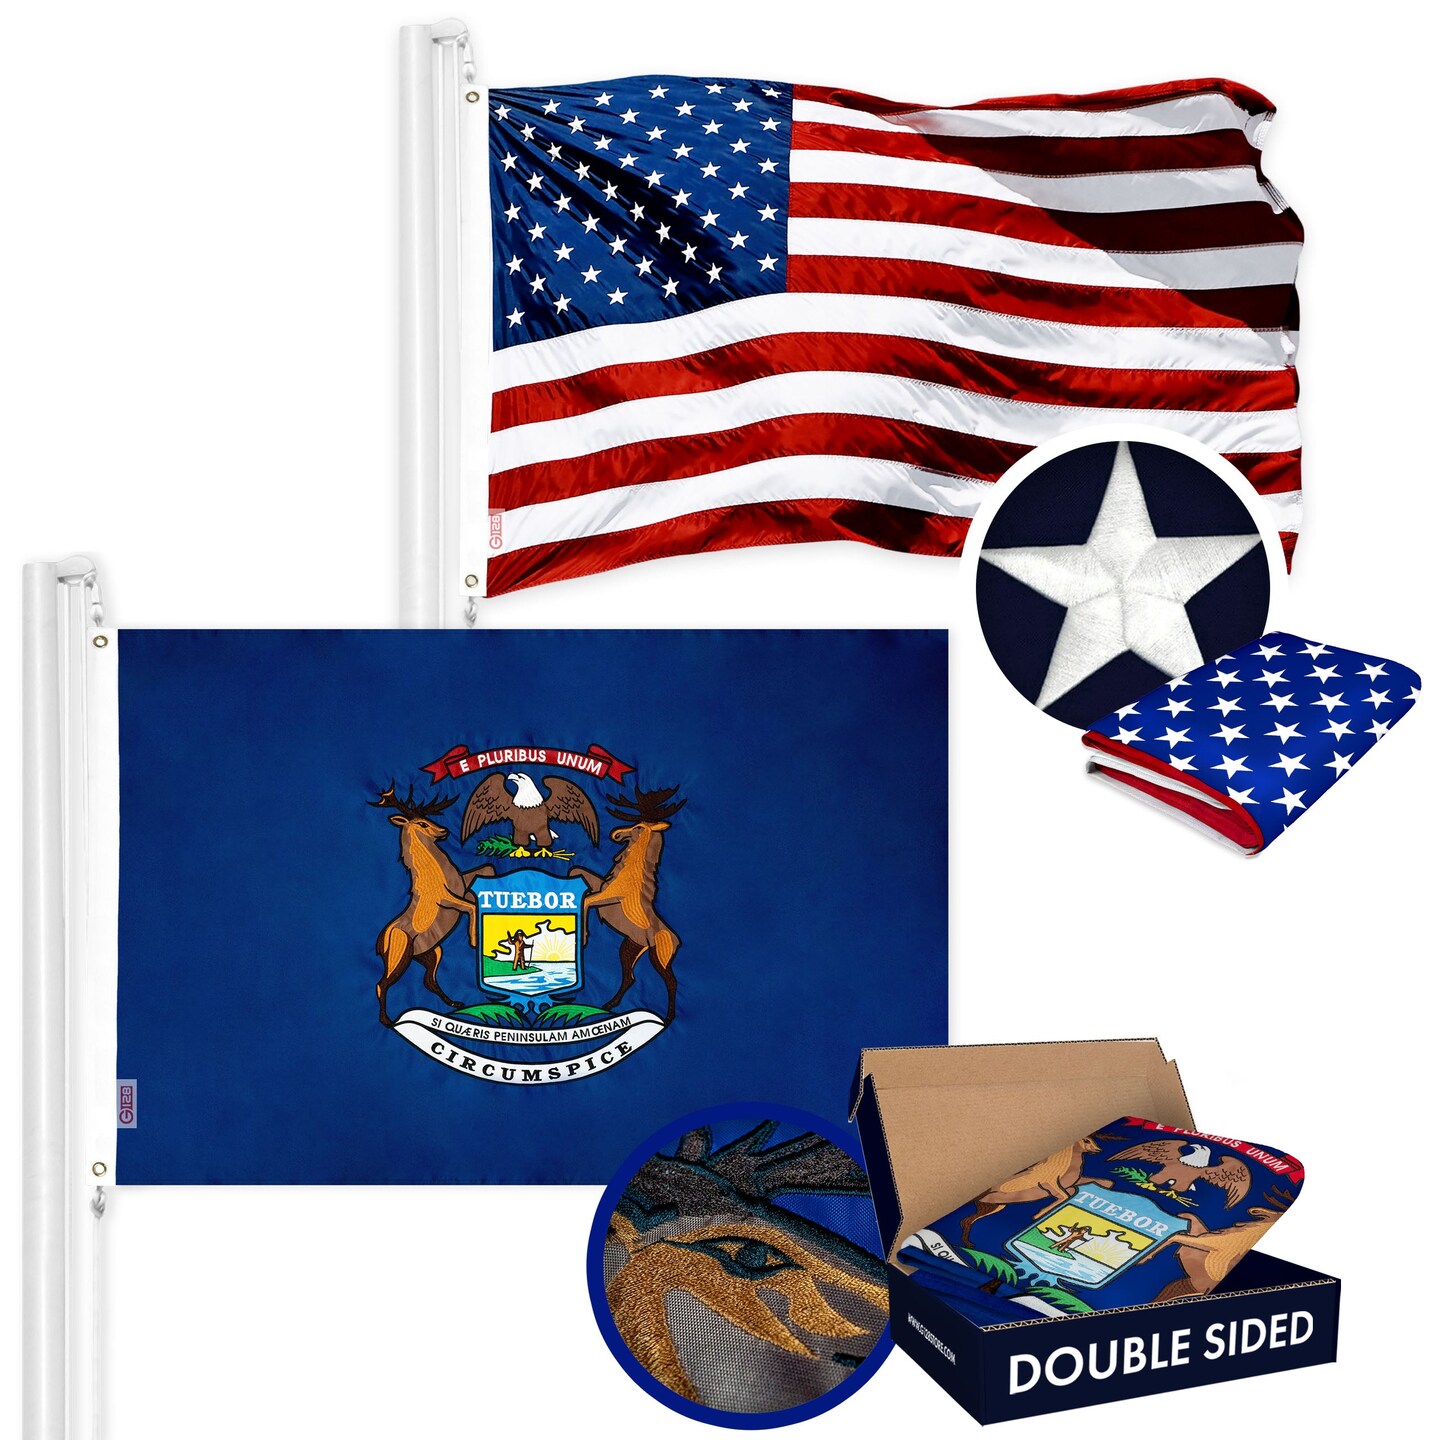 G128 Combo Pack: USA American Flag 3x5 Ft Embroidered Stars &#x26; Michigan State Flag 3x5 Ft Embroidered Double Sided 2ply